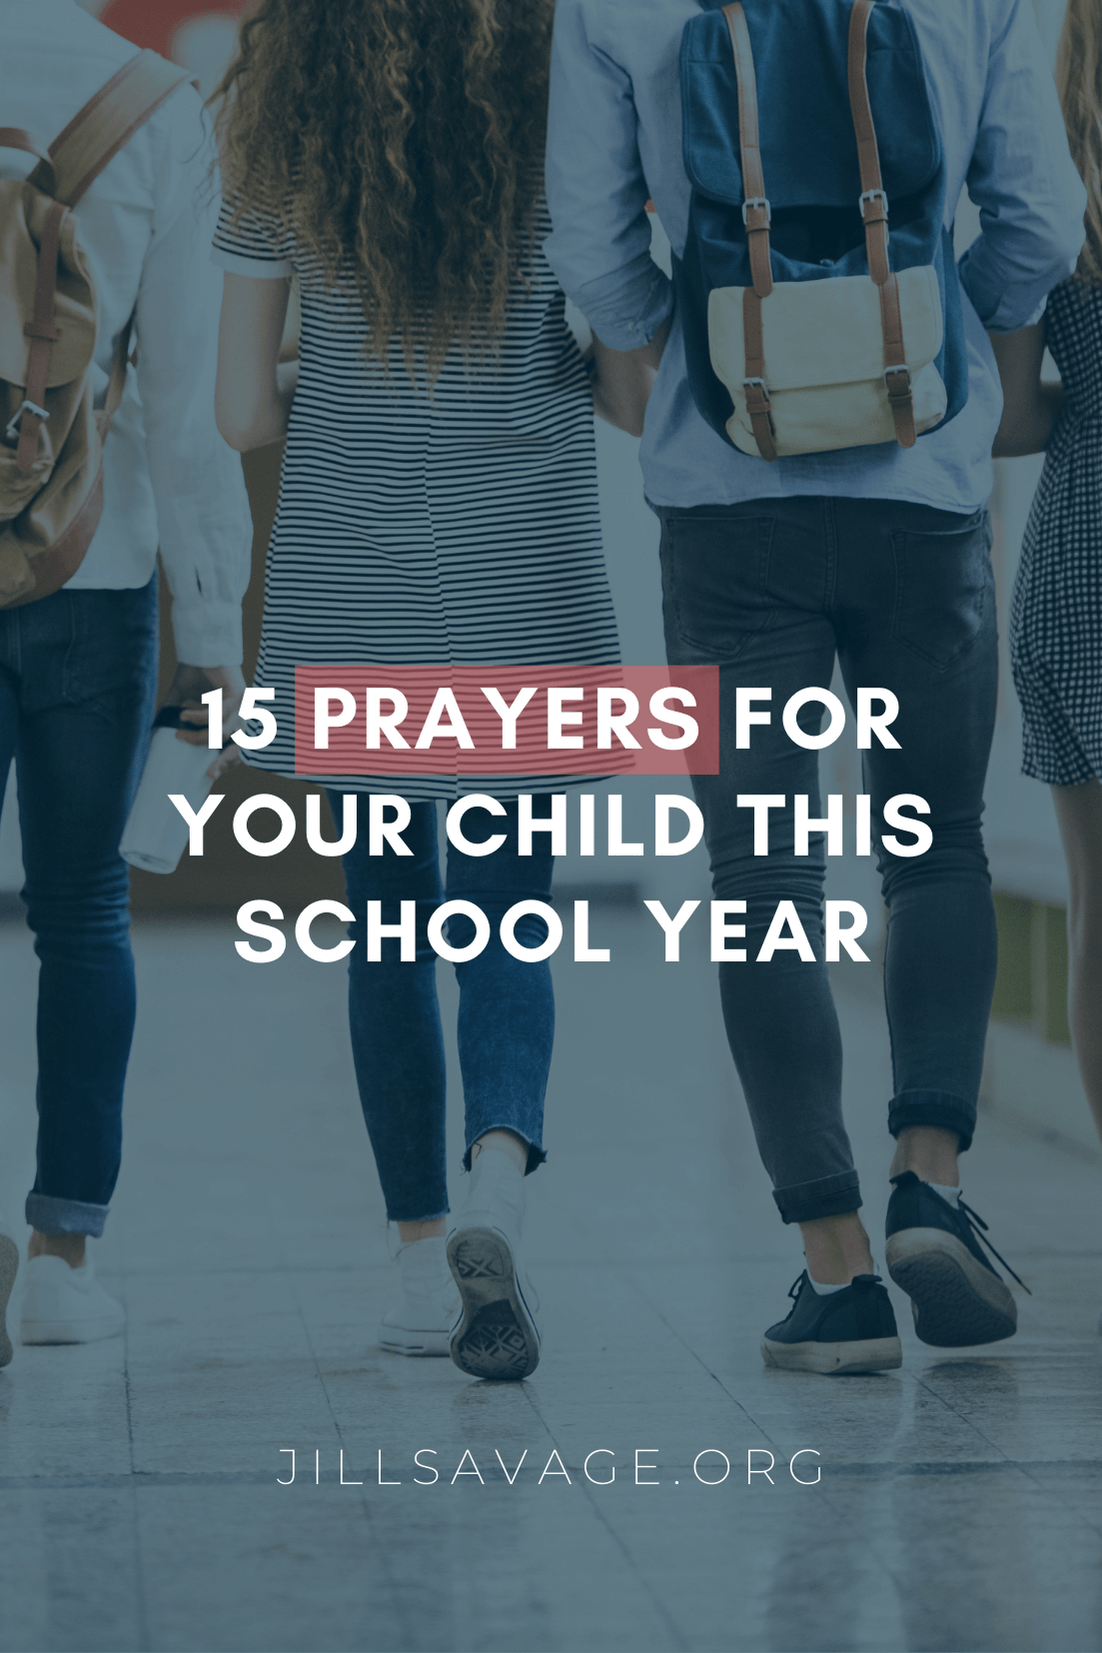 15 Prayers for Your Child This School Year